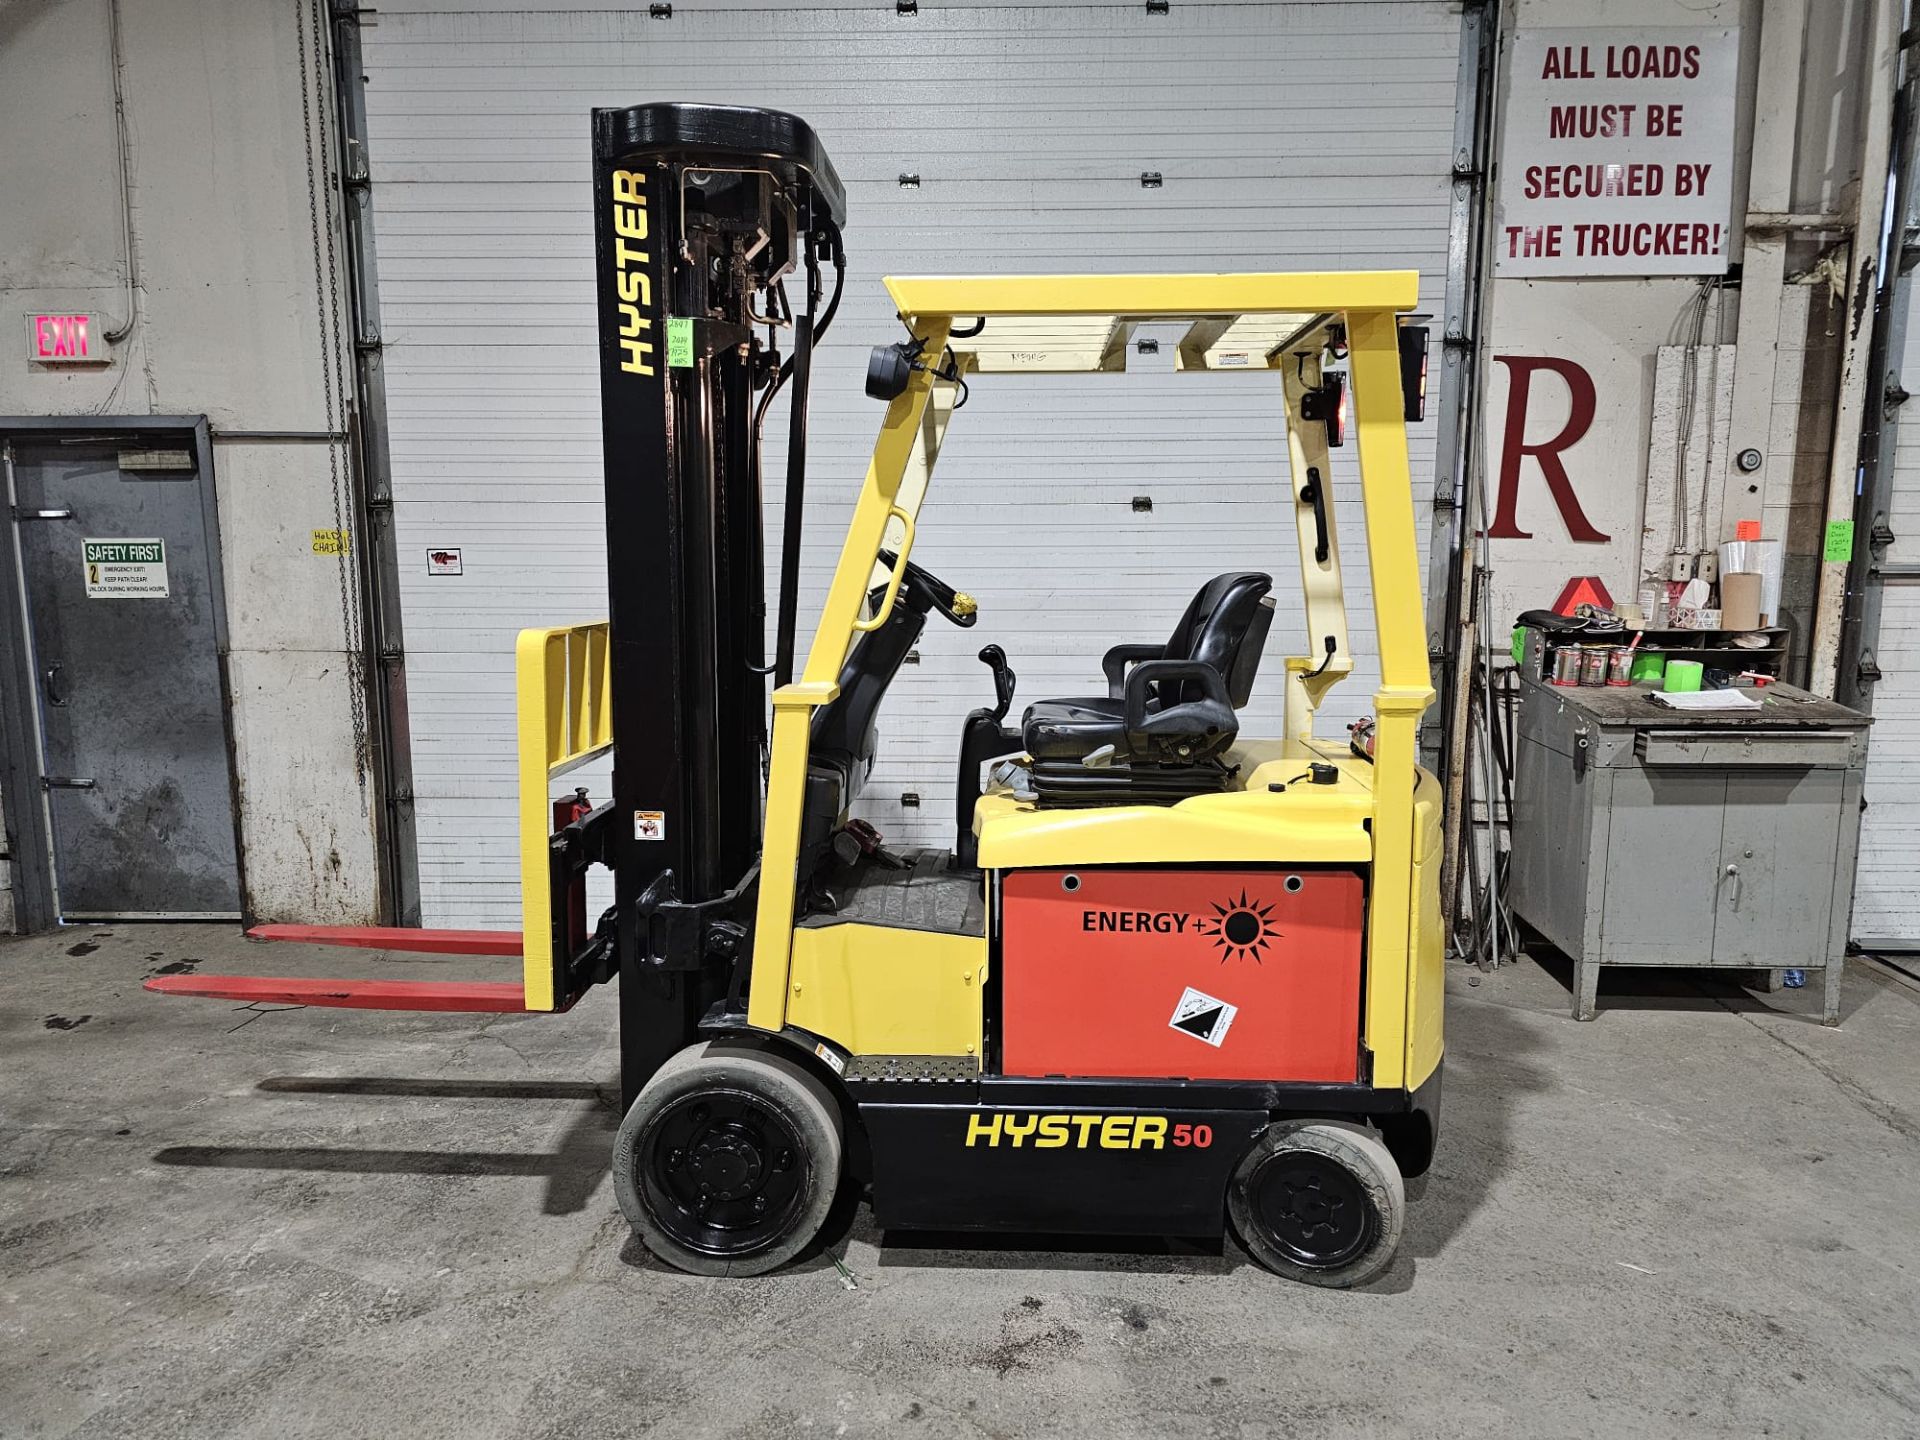 2014 Hyster 5,000lbs Forklift Electric 48V 4-STAGE Mast & Sideshift Brand New 48V Battery with Non-